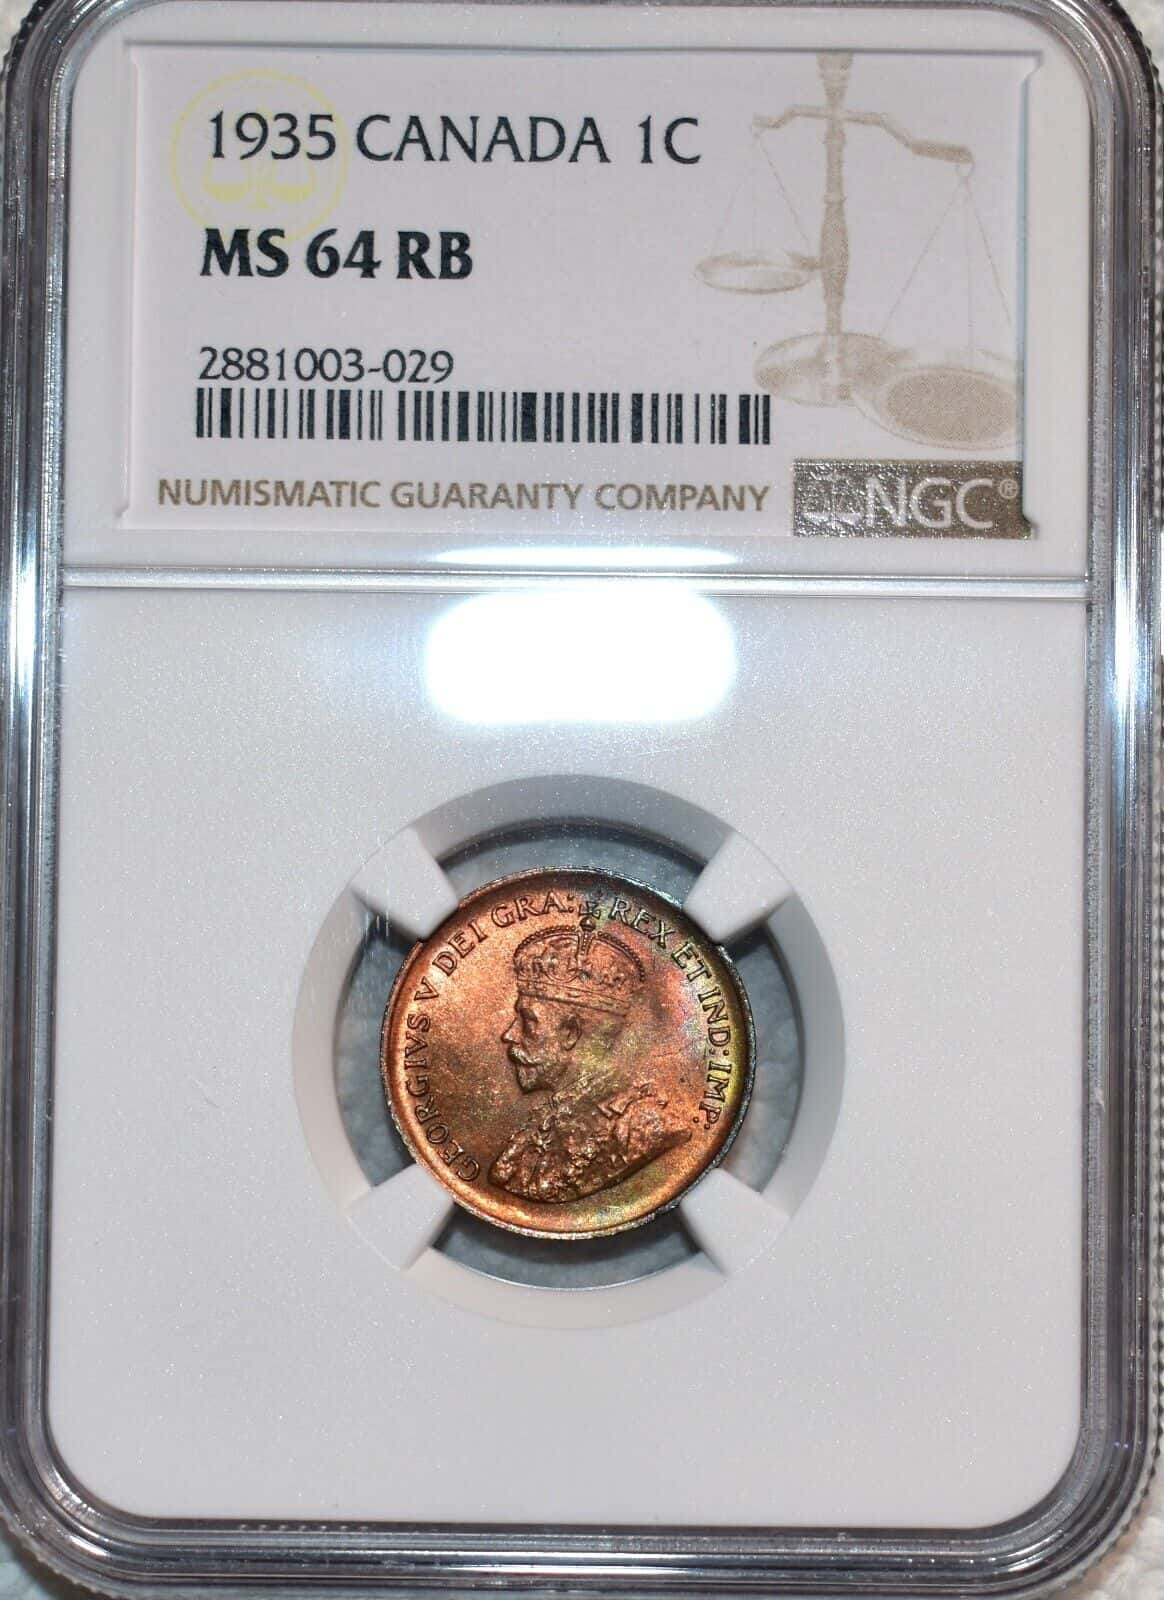 NGC MS-64 RB 1935 Canadian Cent, Richly toned, Red-Brown specimen